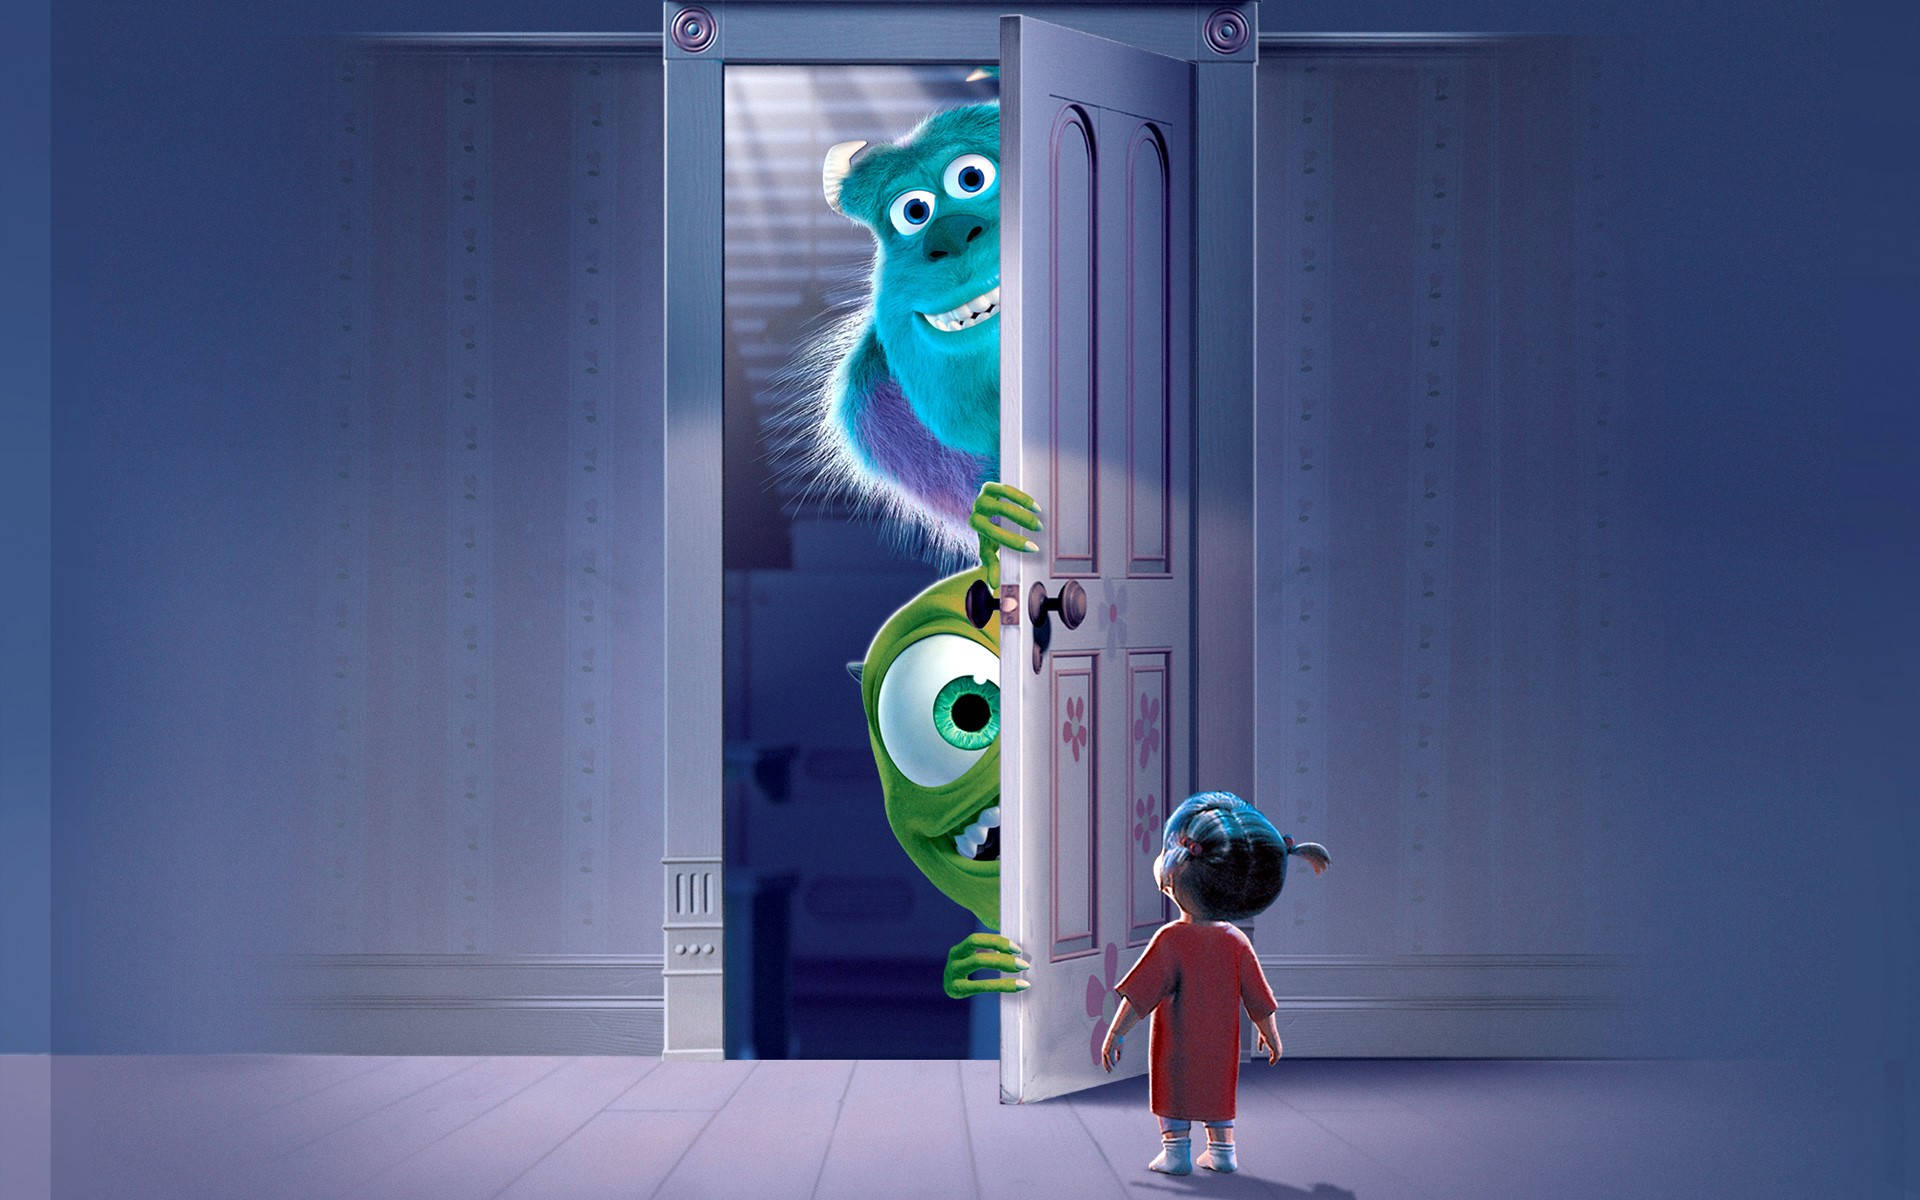 Caption: Boo, Sulley, And Mike From Monsters Inc. In An Adventurous Day Background